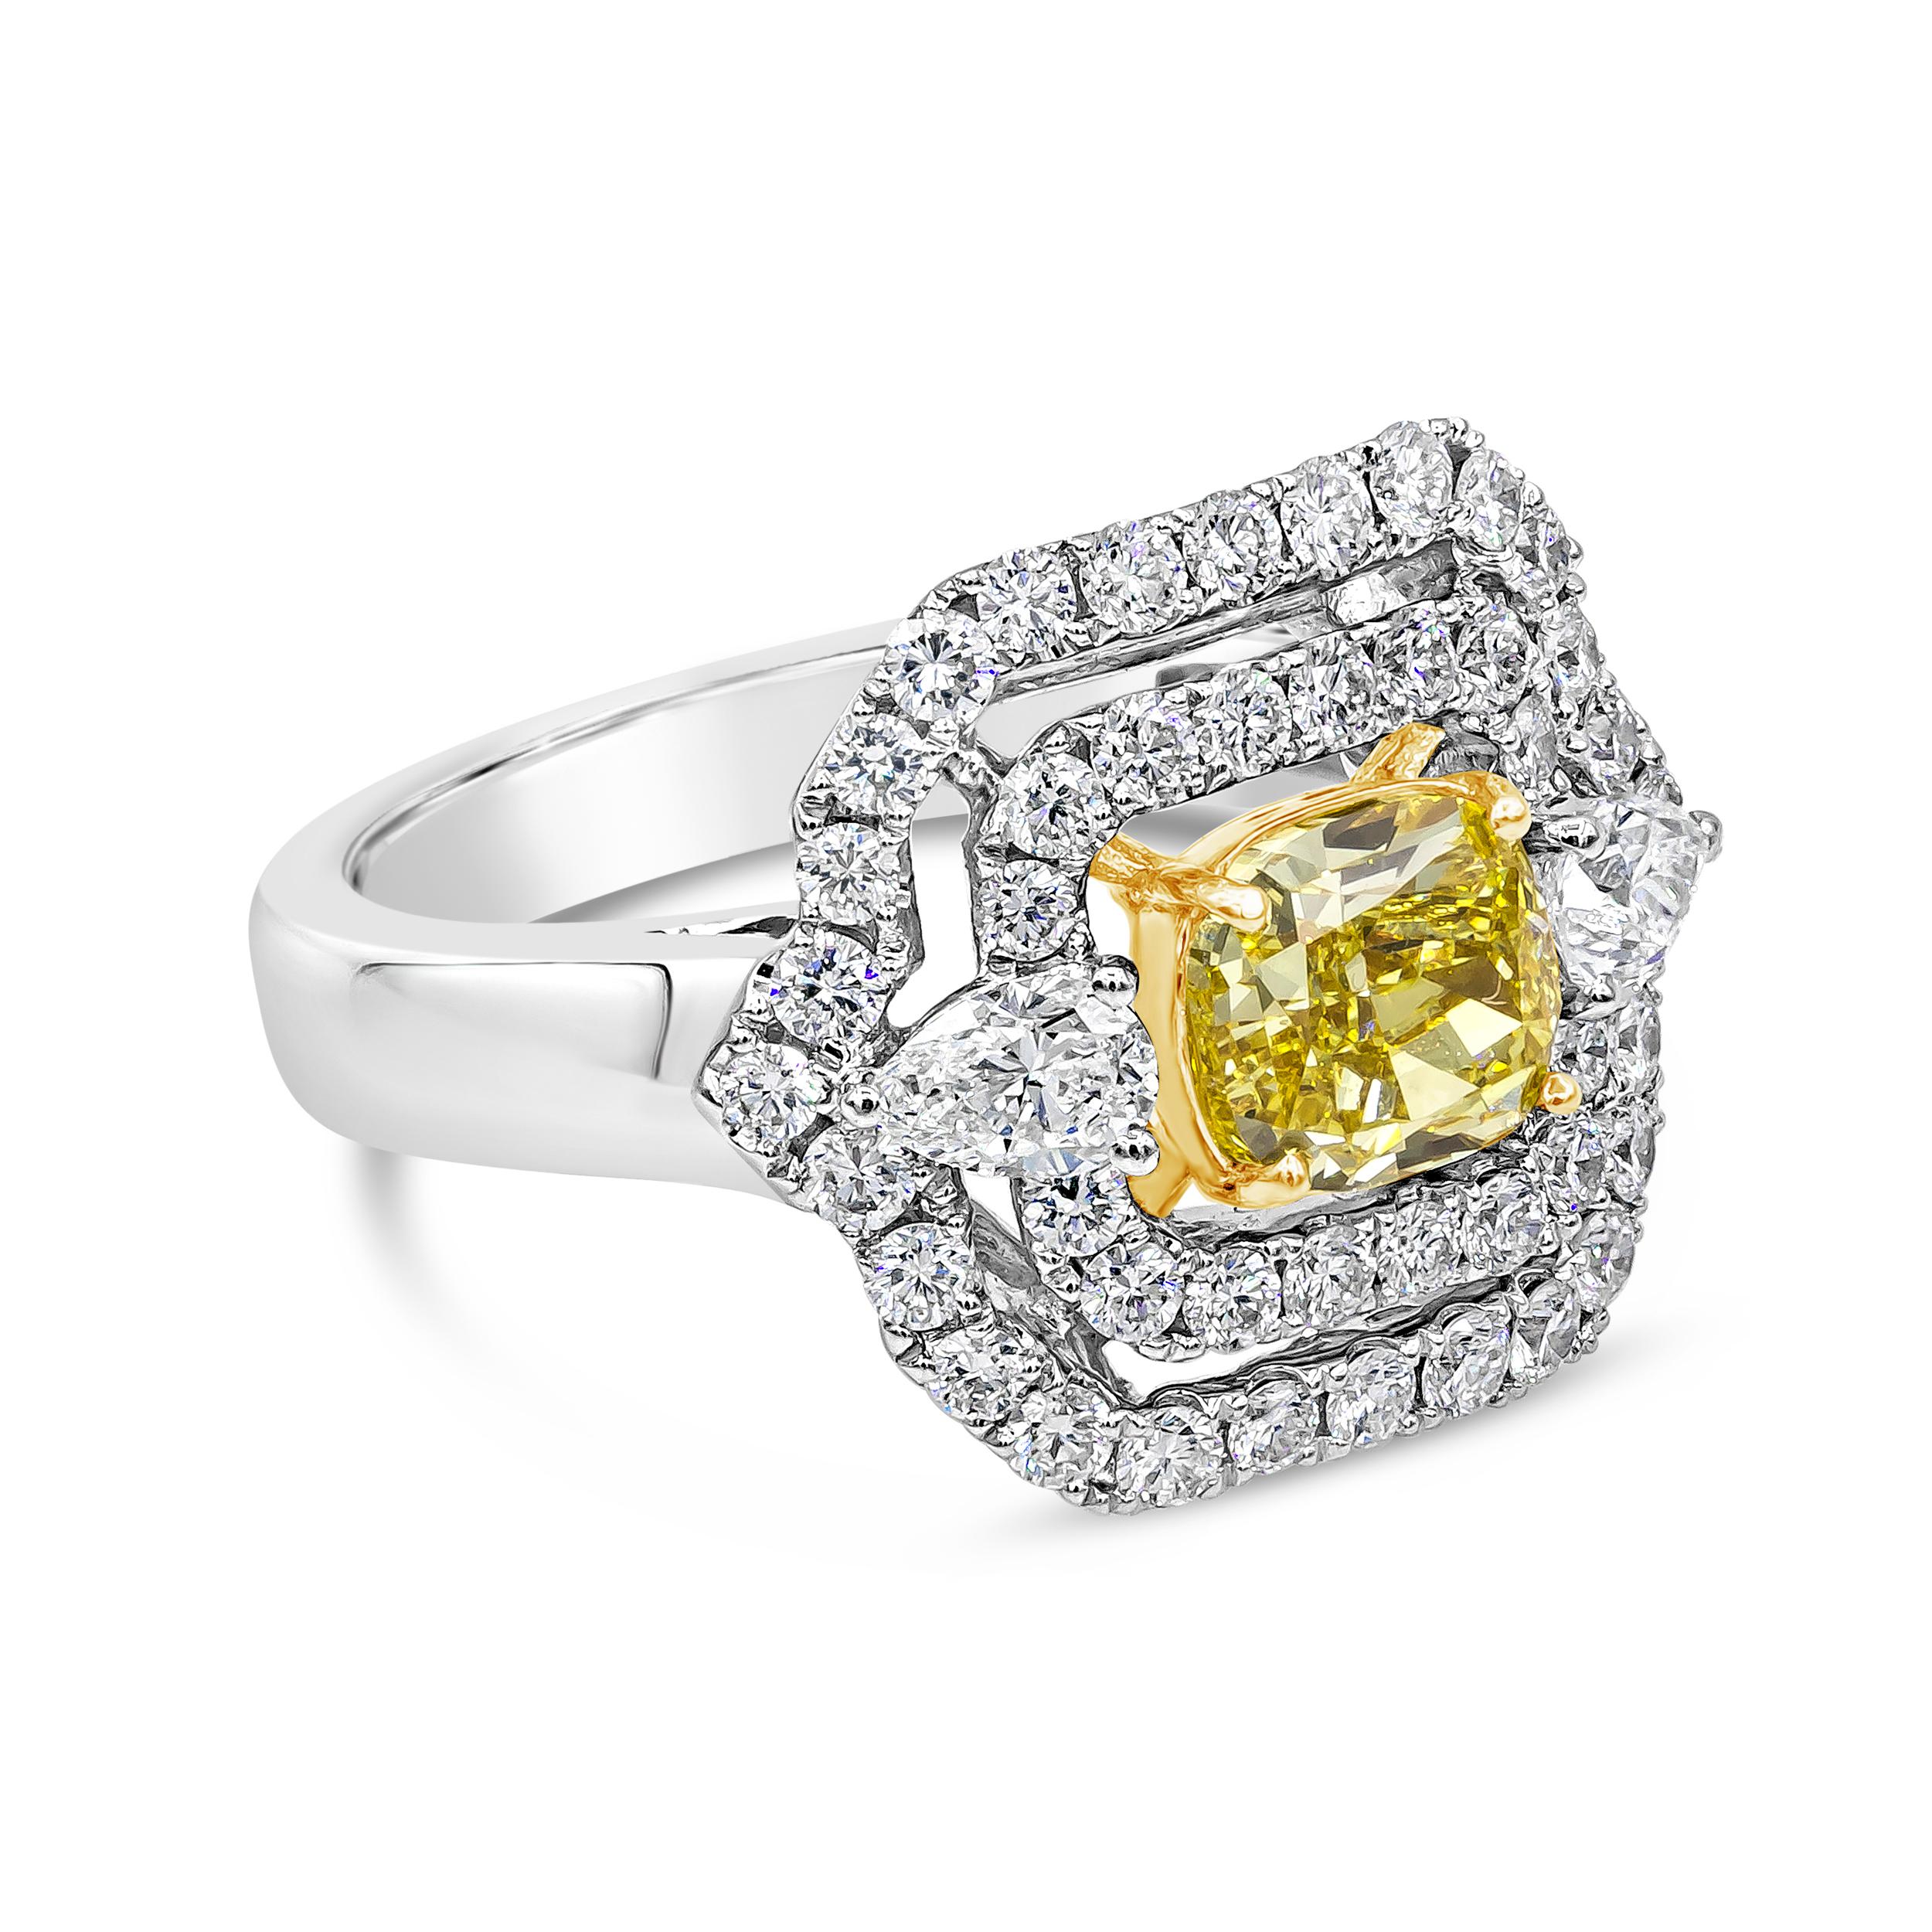 This elegant engagement ring showcasing a 1.32 carats cushion cut yellow diamond certified by GIA as Fancy Intense Yellow Color, VS1 in clarity. Center diamond is set in a floating double halo embellished with round brilliant diamonds. Finished with